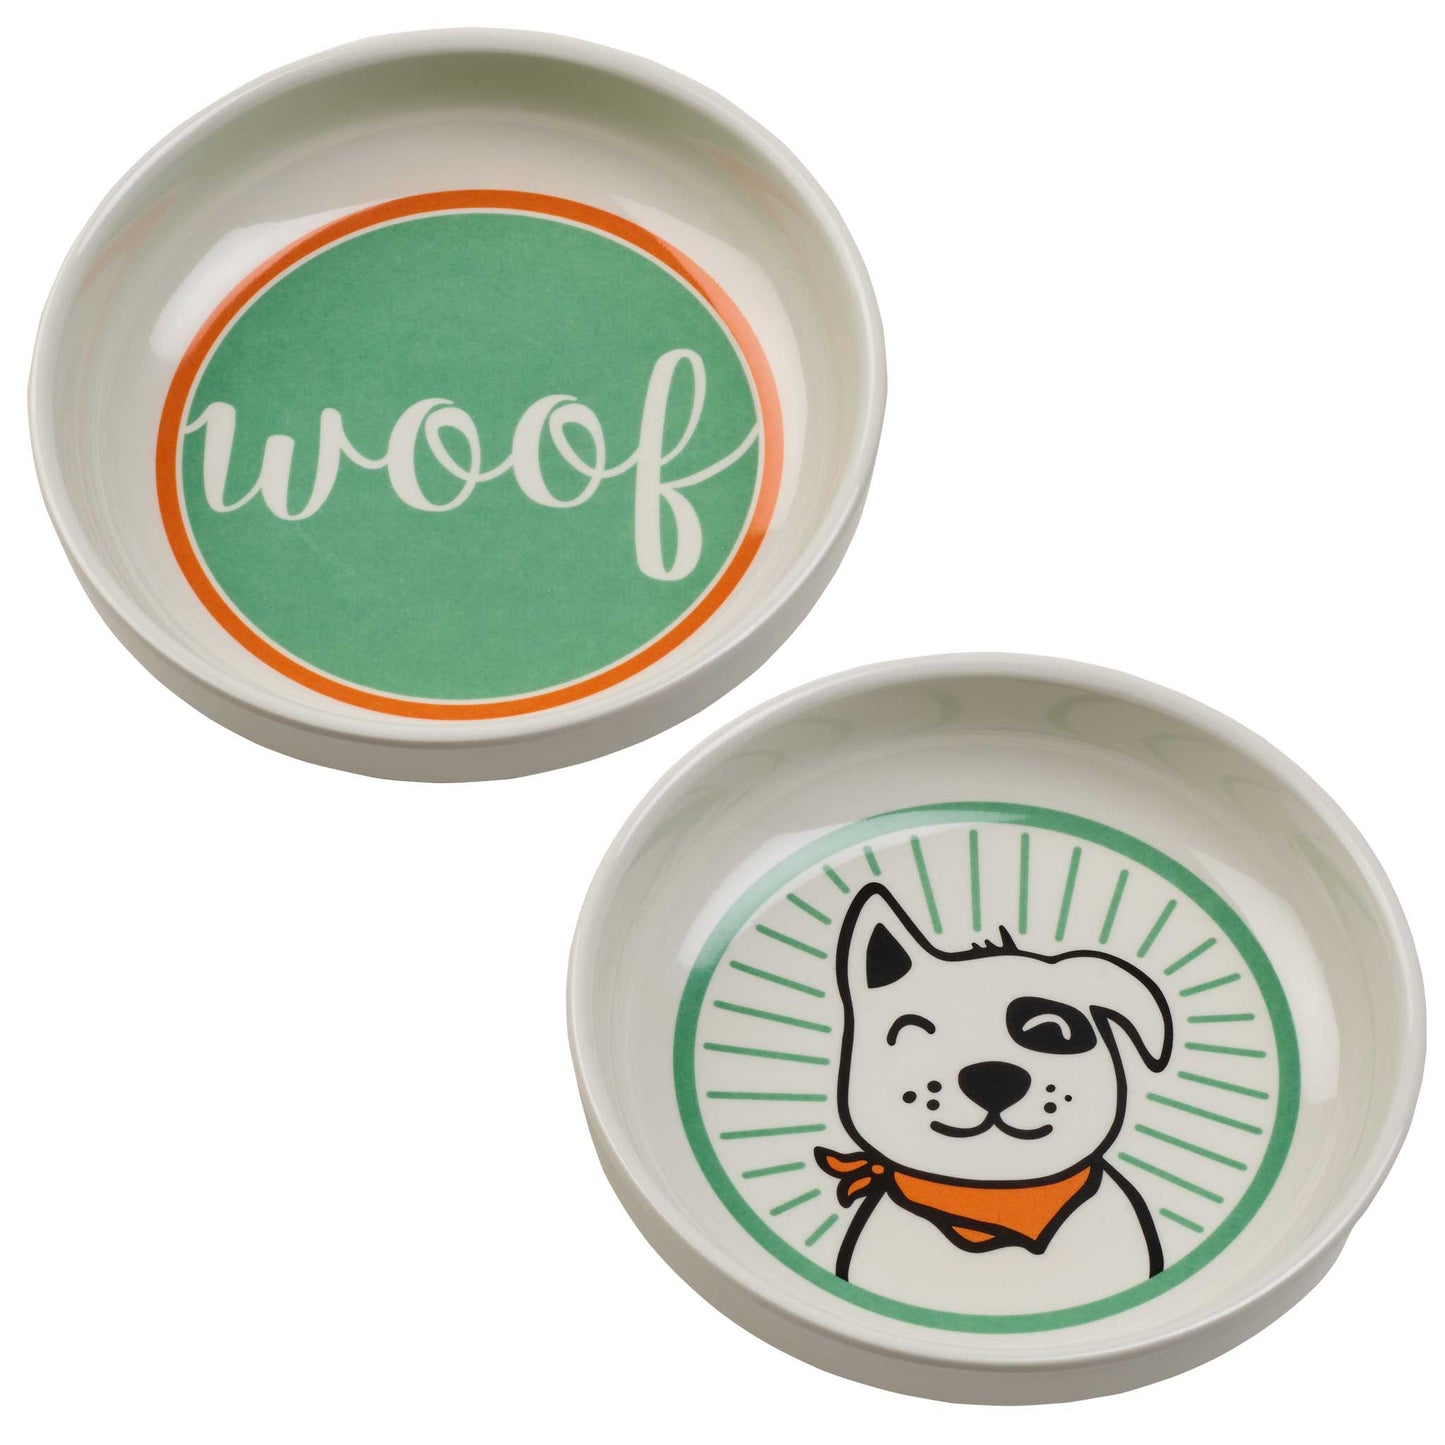 top of 2 white bowls- one with green and orange background with white scripted text "woof" and one with green background with illustrated black and white dog with orange bandana